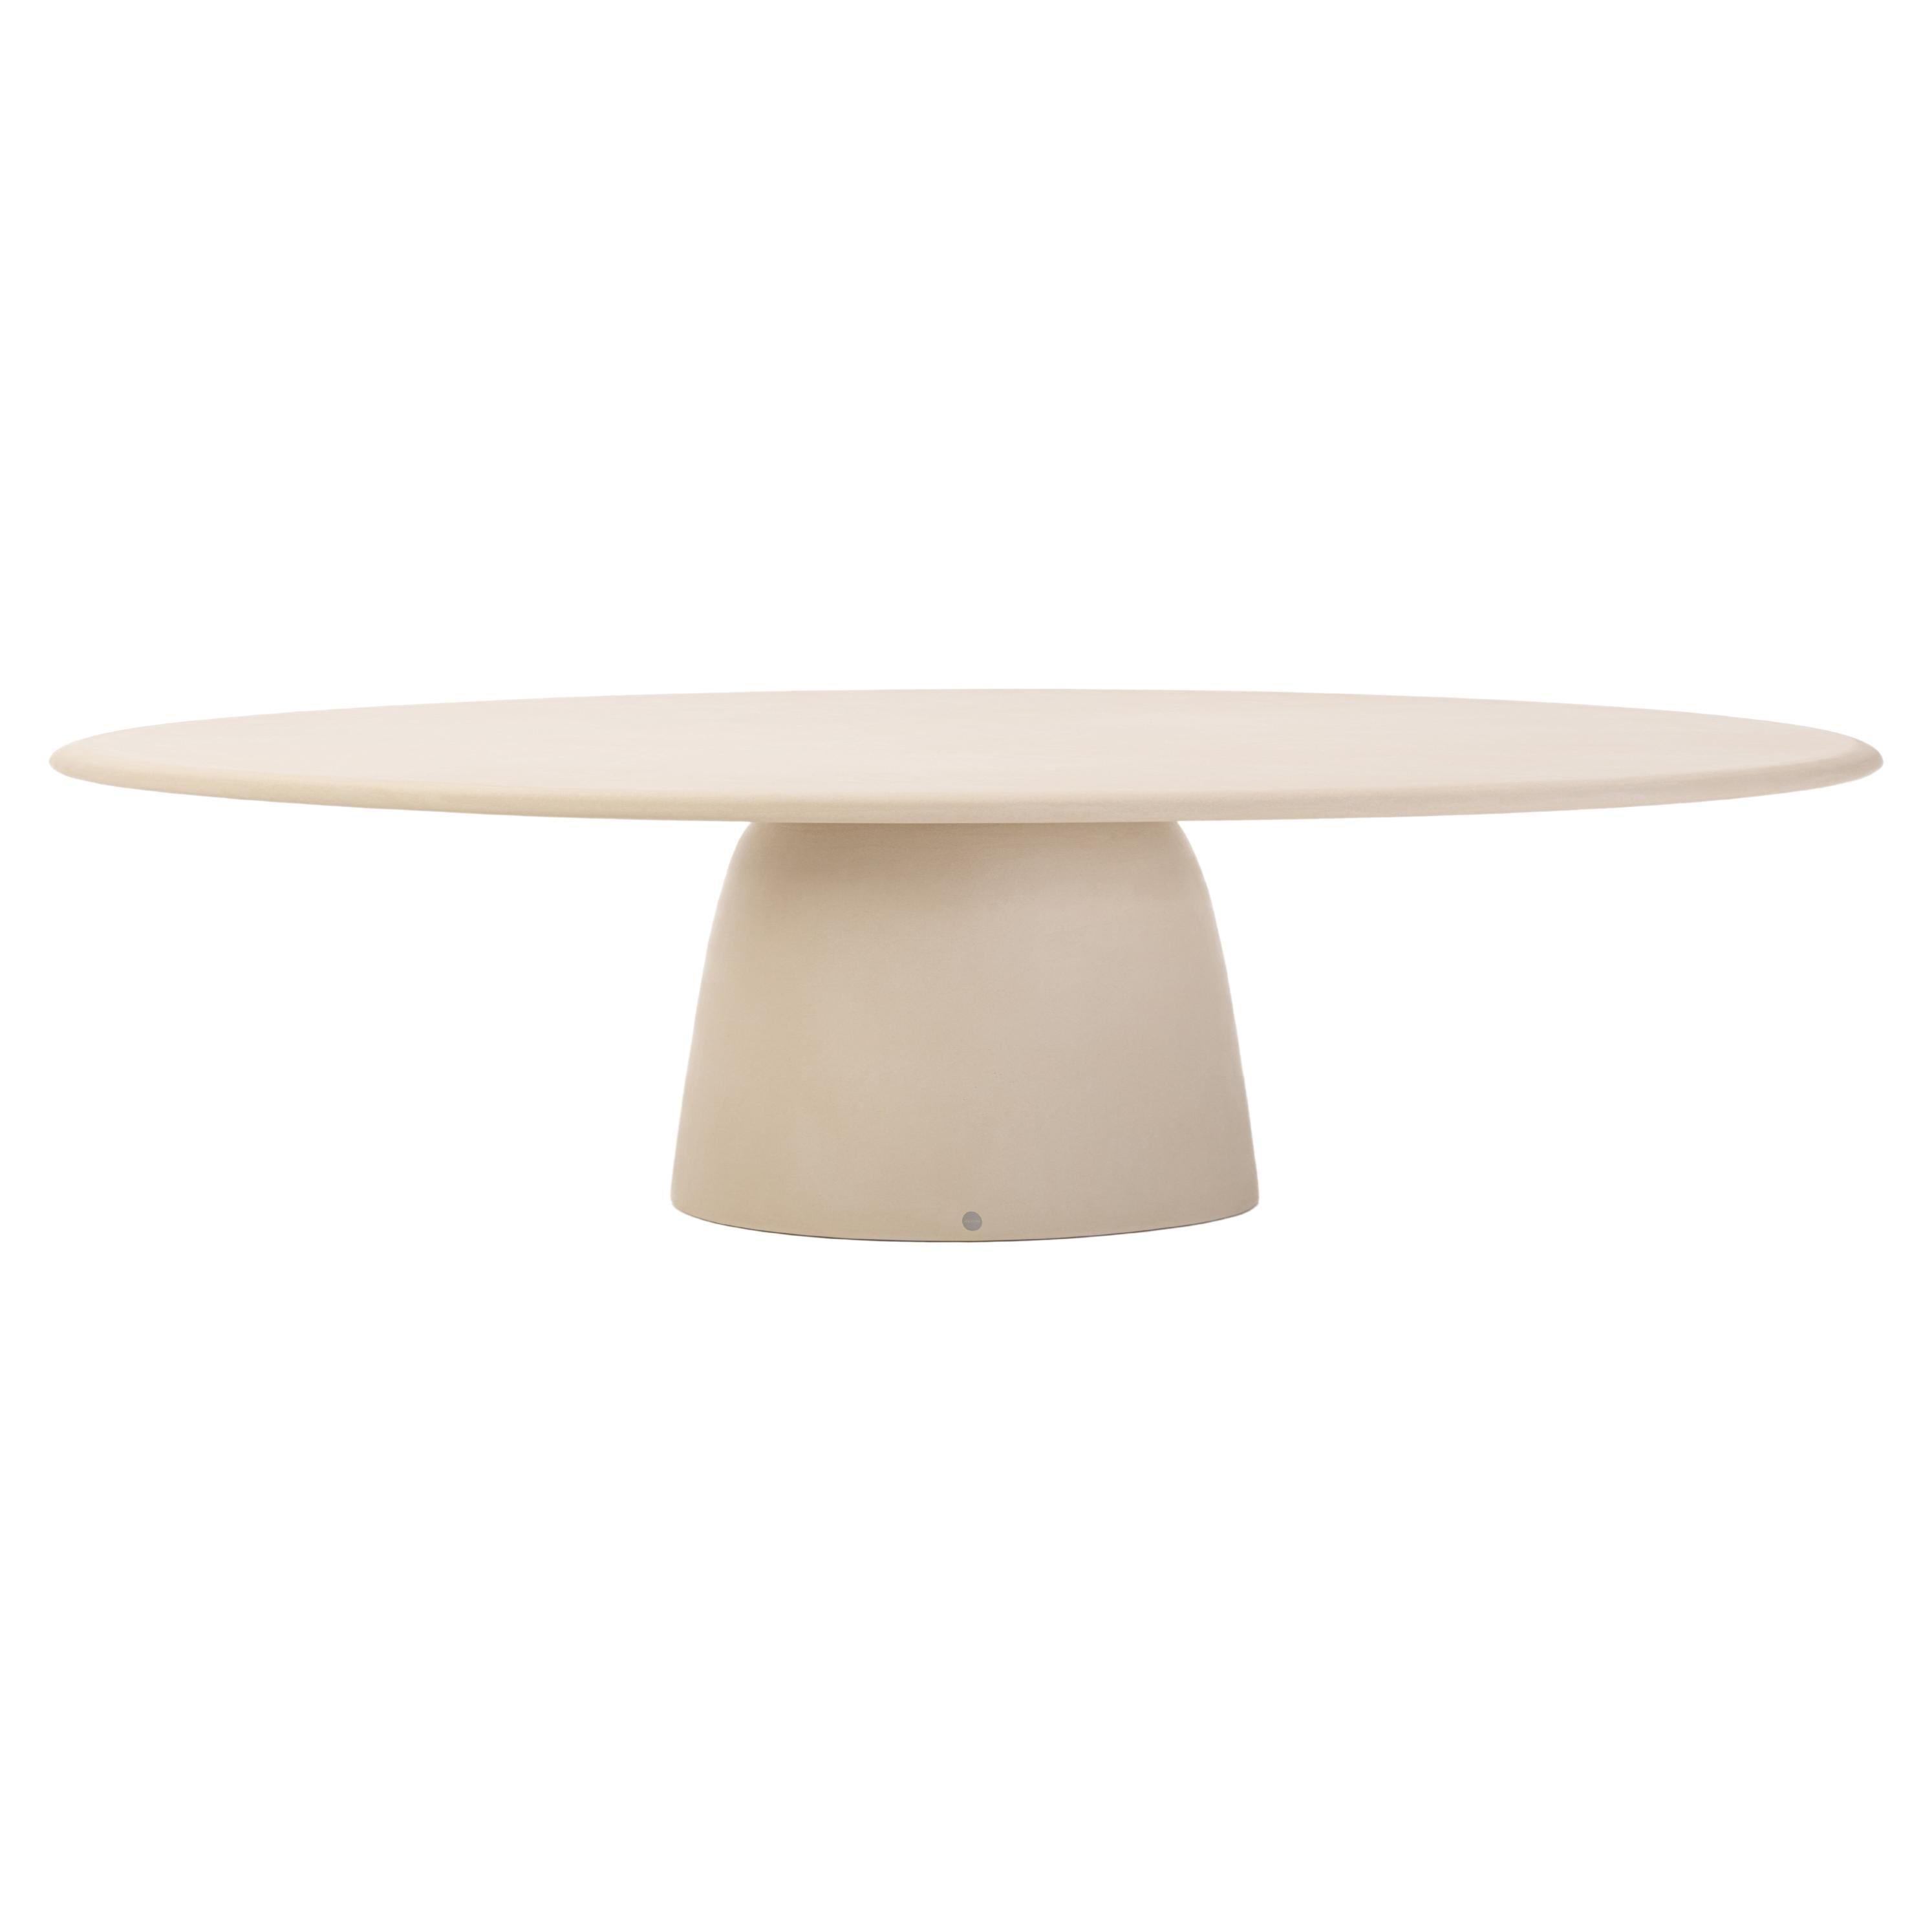 Round Natural Plaster Dining Table 300 "Menhir" by Isabelle Beaumont For Sale